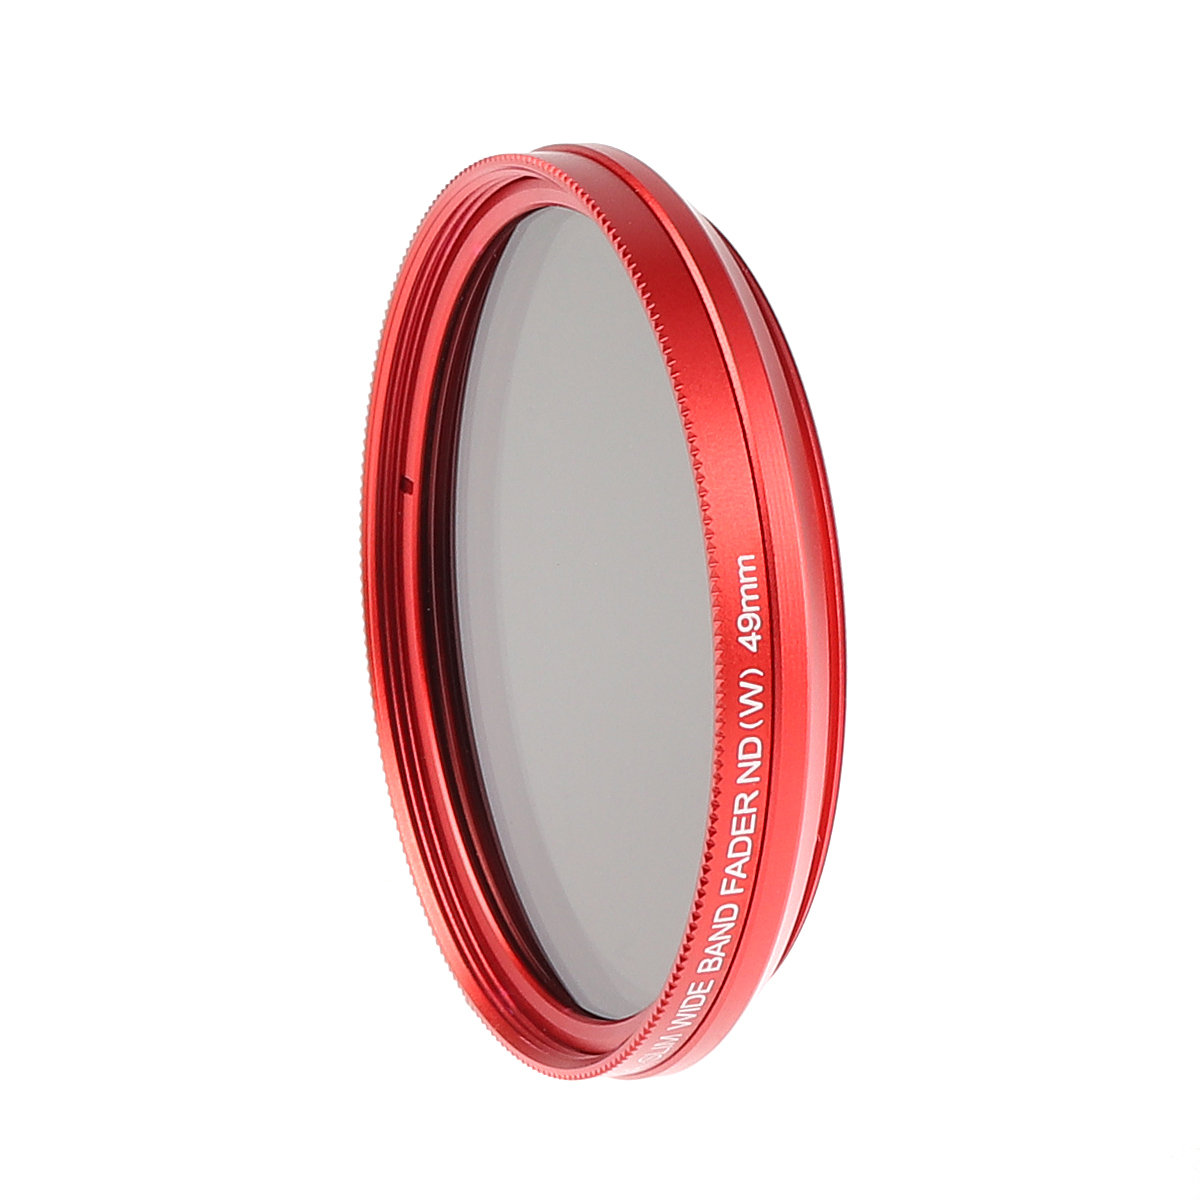 FocusFoto Fotga 52mm Ultra Slim Variable Fader ND2-ND400 Neutral Density ND Filter Adjustable ND2 ND4 ND8 ND16 ND32 ND100 to ND400 for Canon Nikon DSLR Camera Lens with Red Frame Ring 